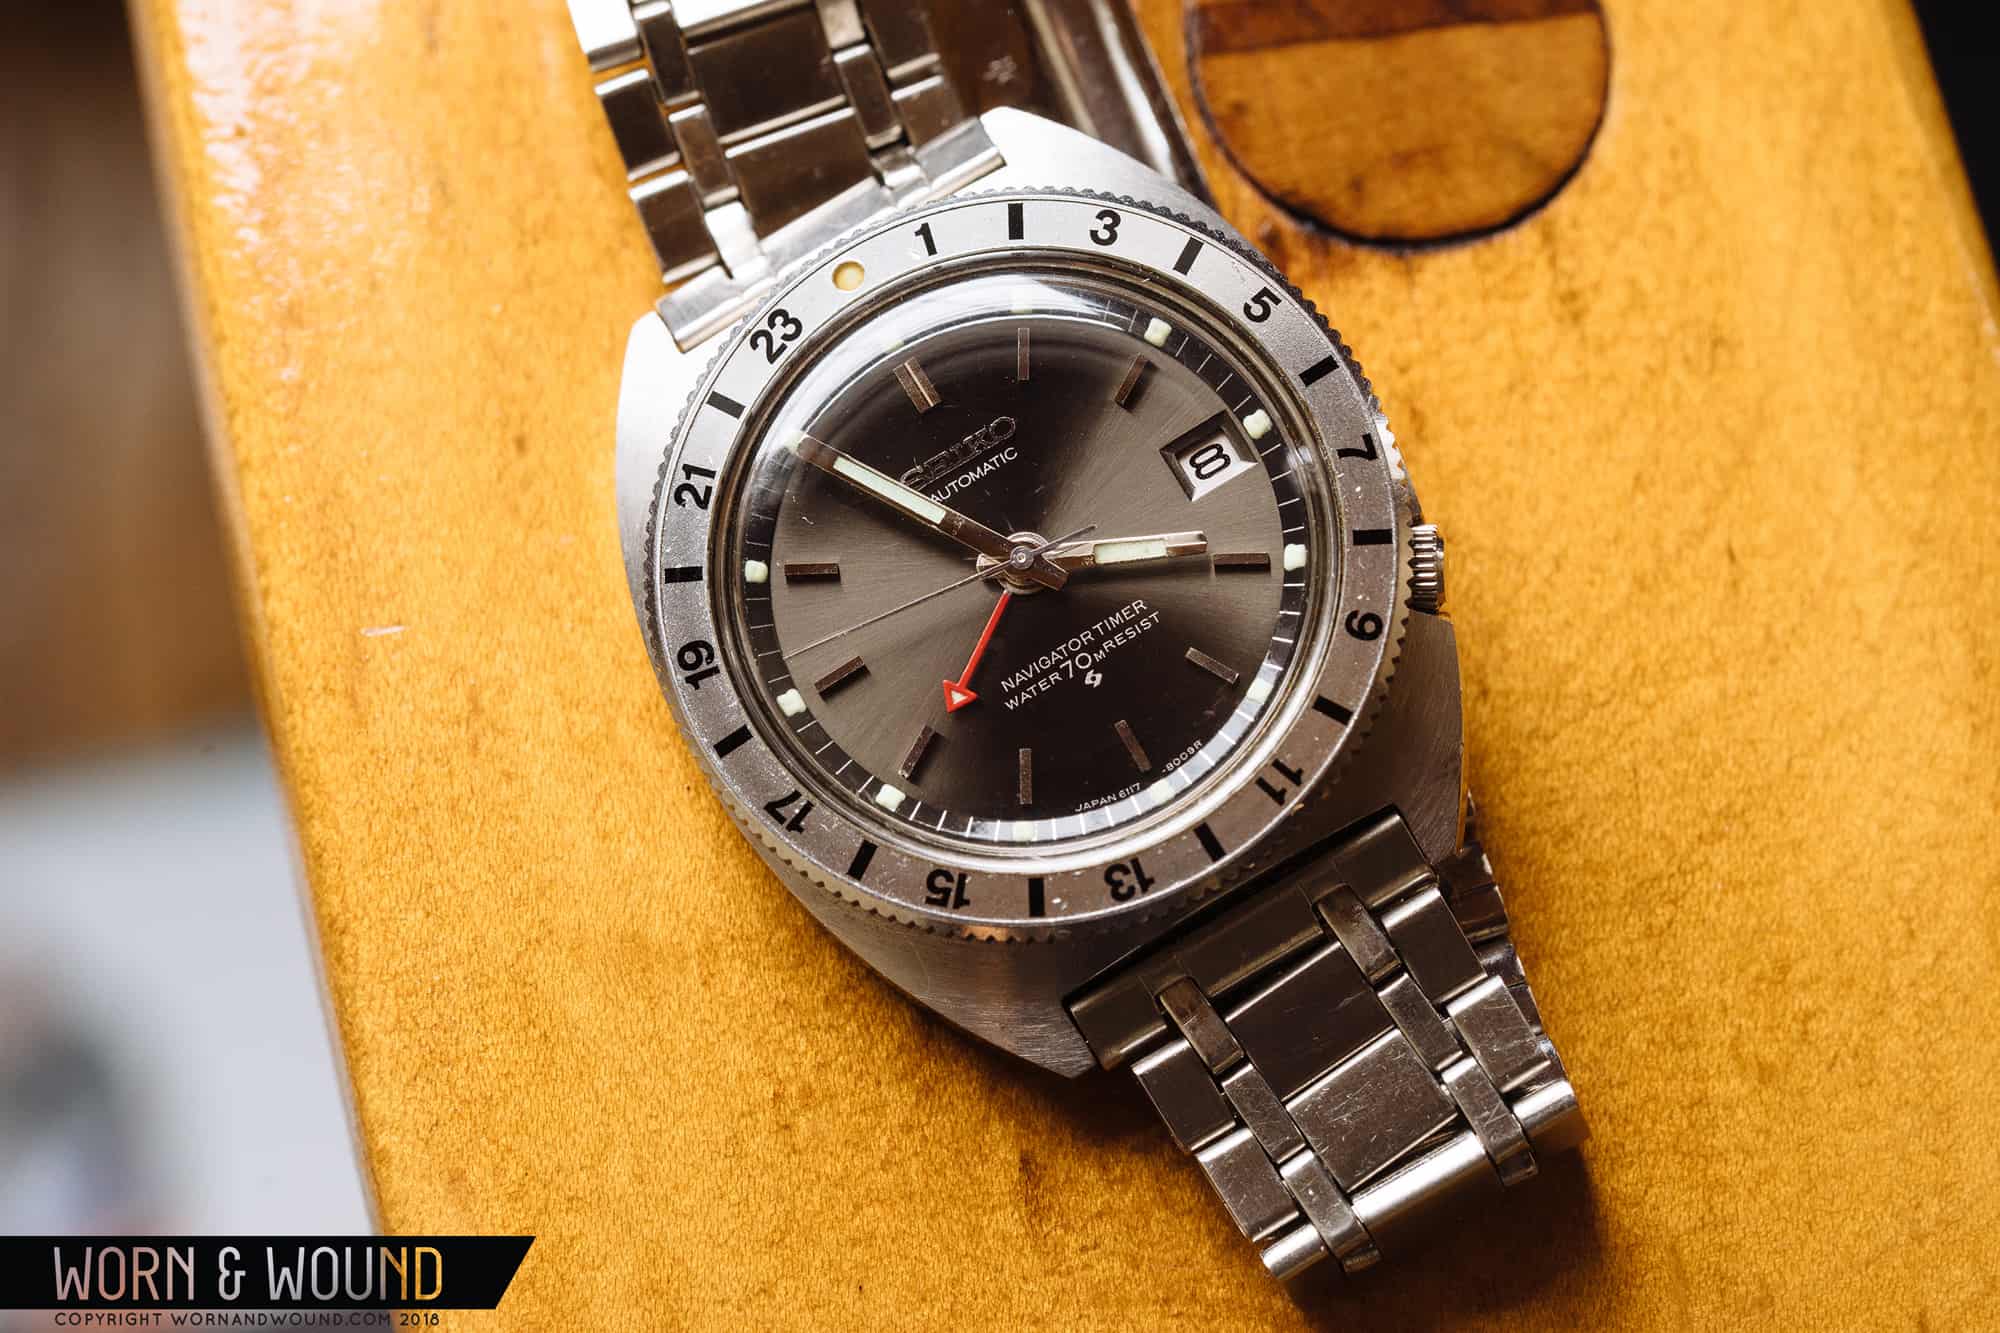 Affordable Vintage: My Journey to a Seiko Navigator Timer ref. 6117-8000 -  Worn & Wound